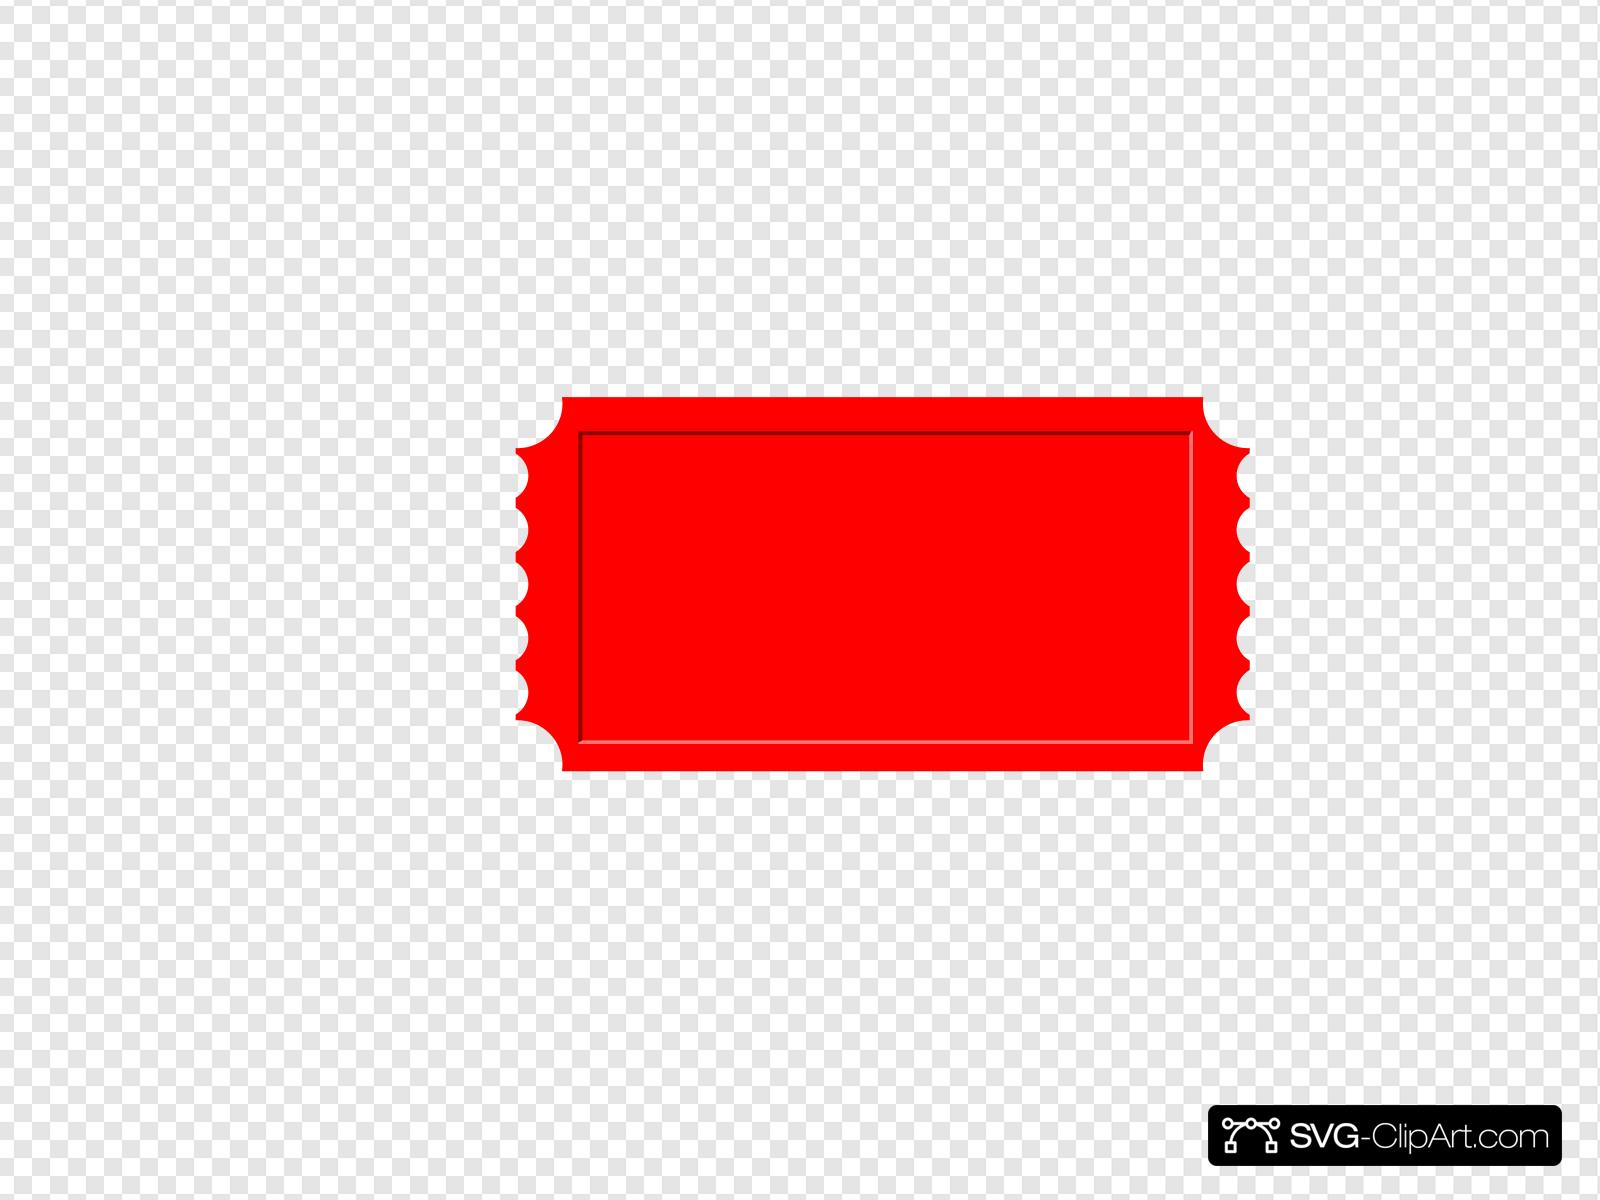 Red Ticket Clip art, Icon and SVG